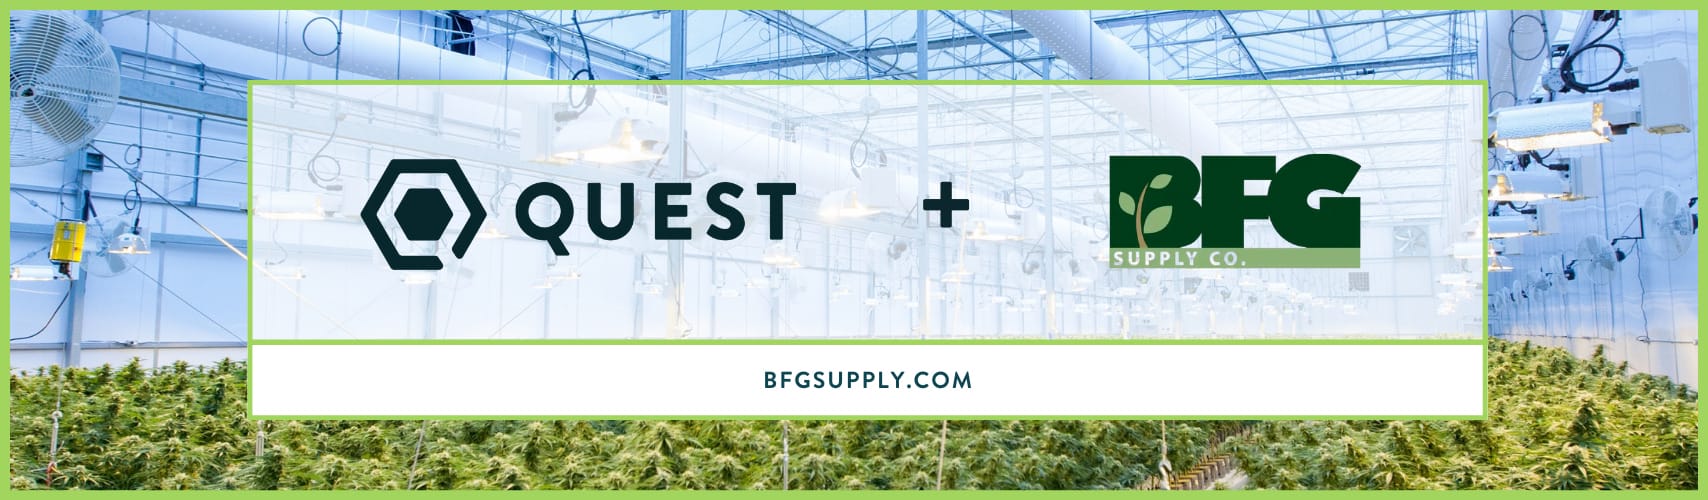 Quest Announces New Partnership with BFG Supply